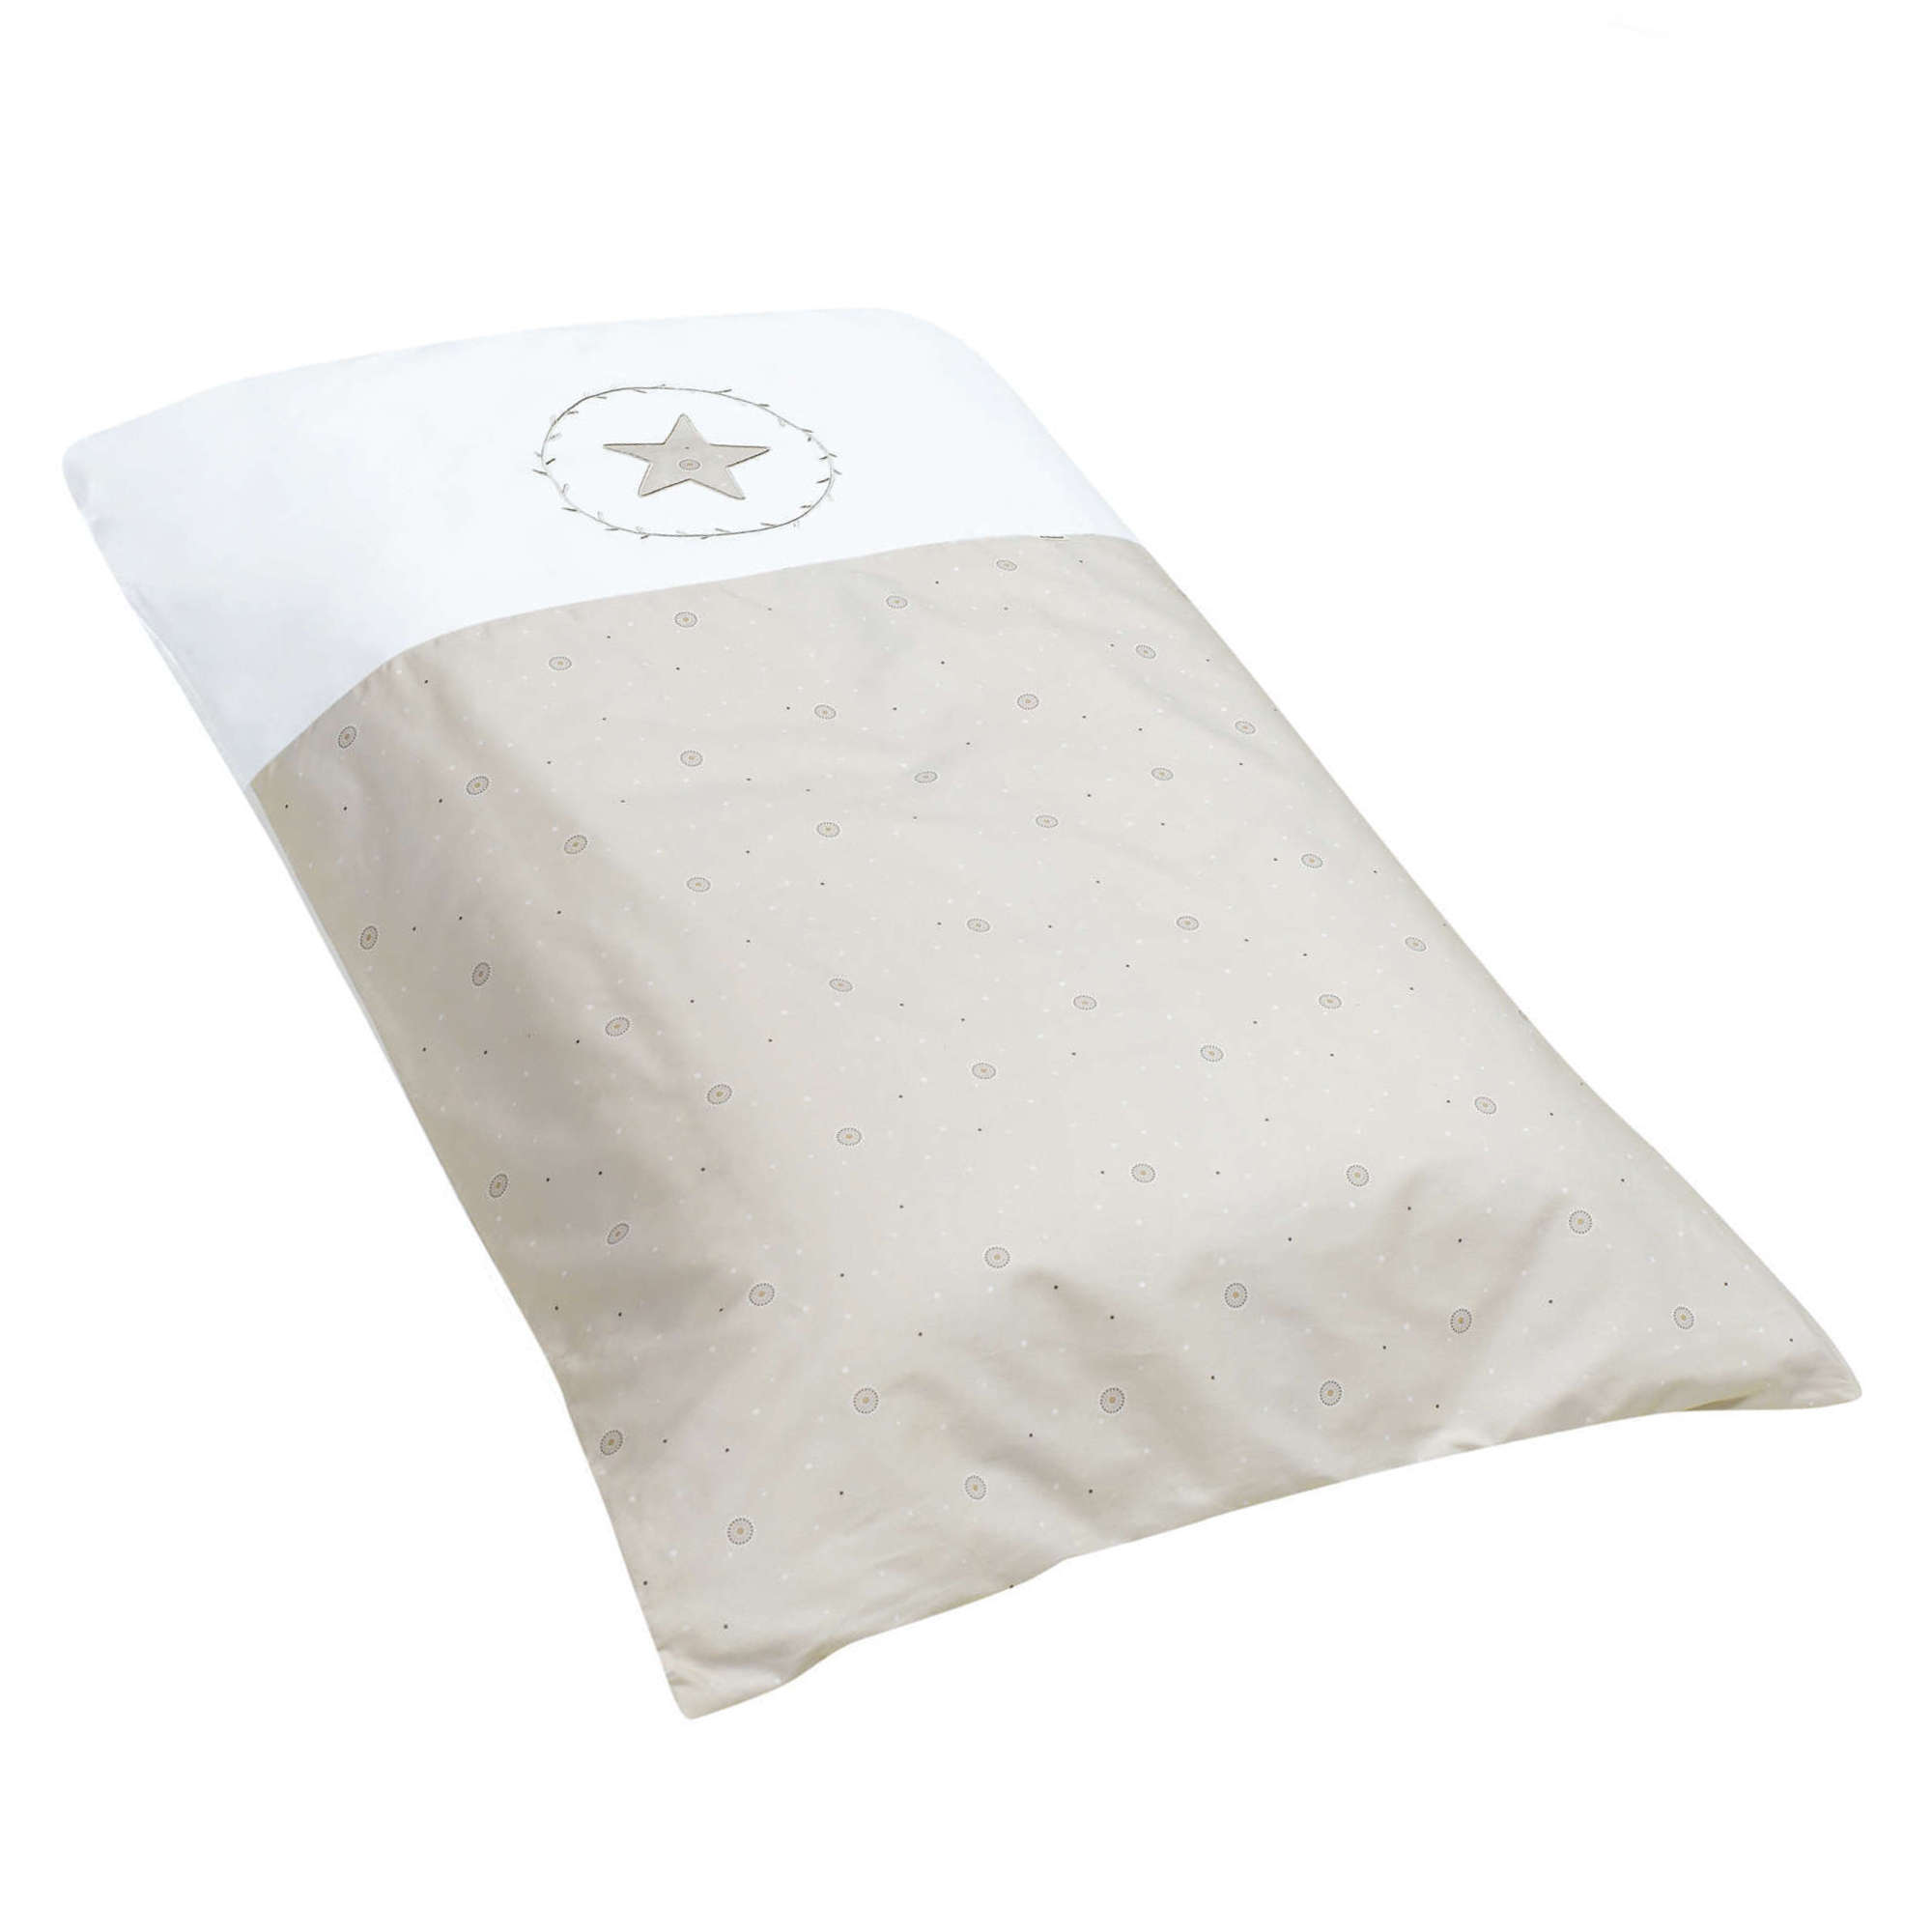 Cot duvet for co-sleeping cot 60x120cm with removable filling